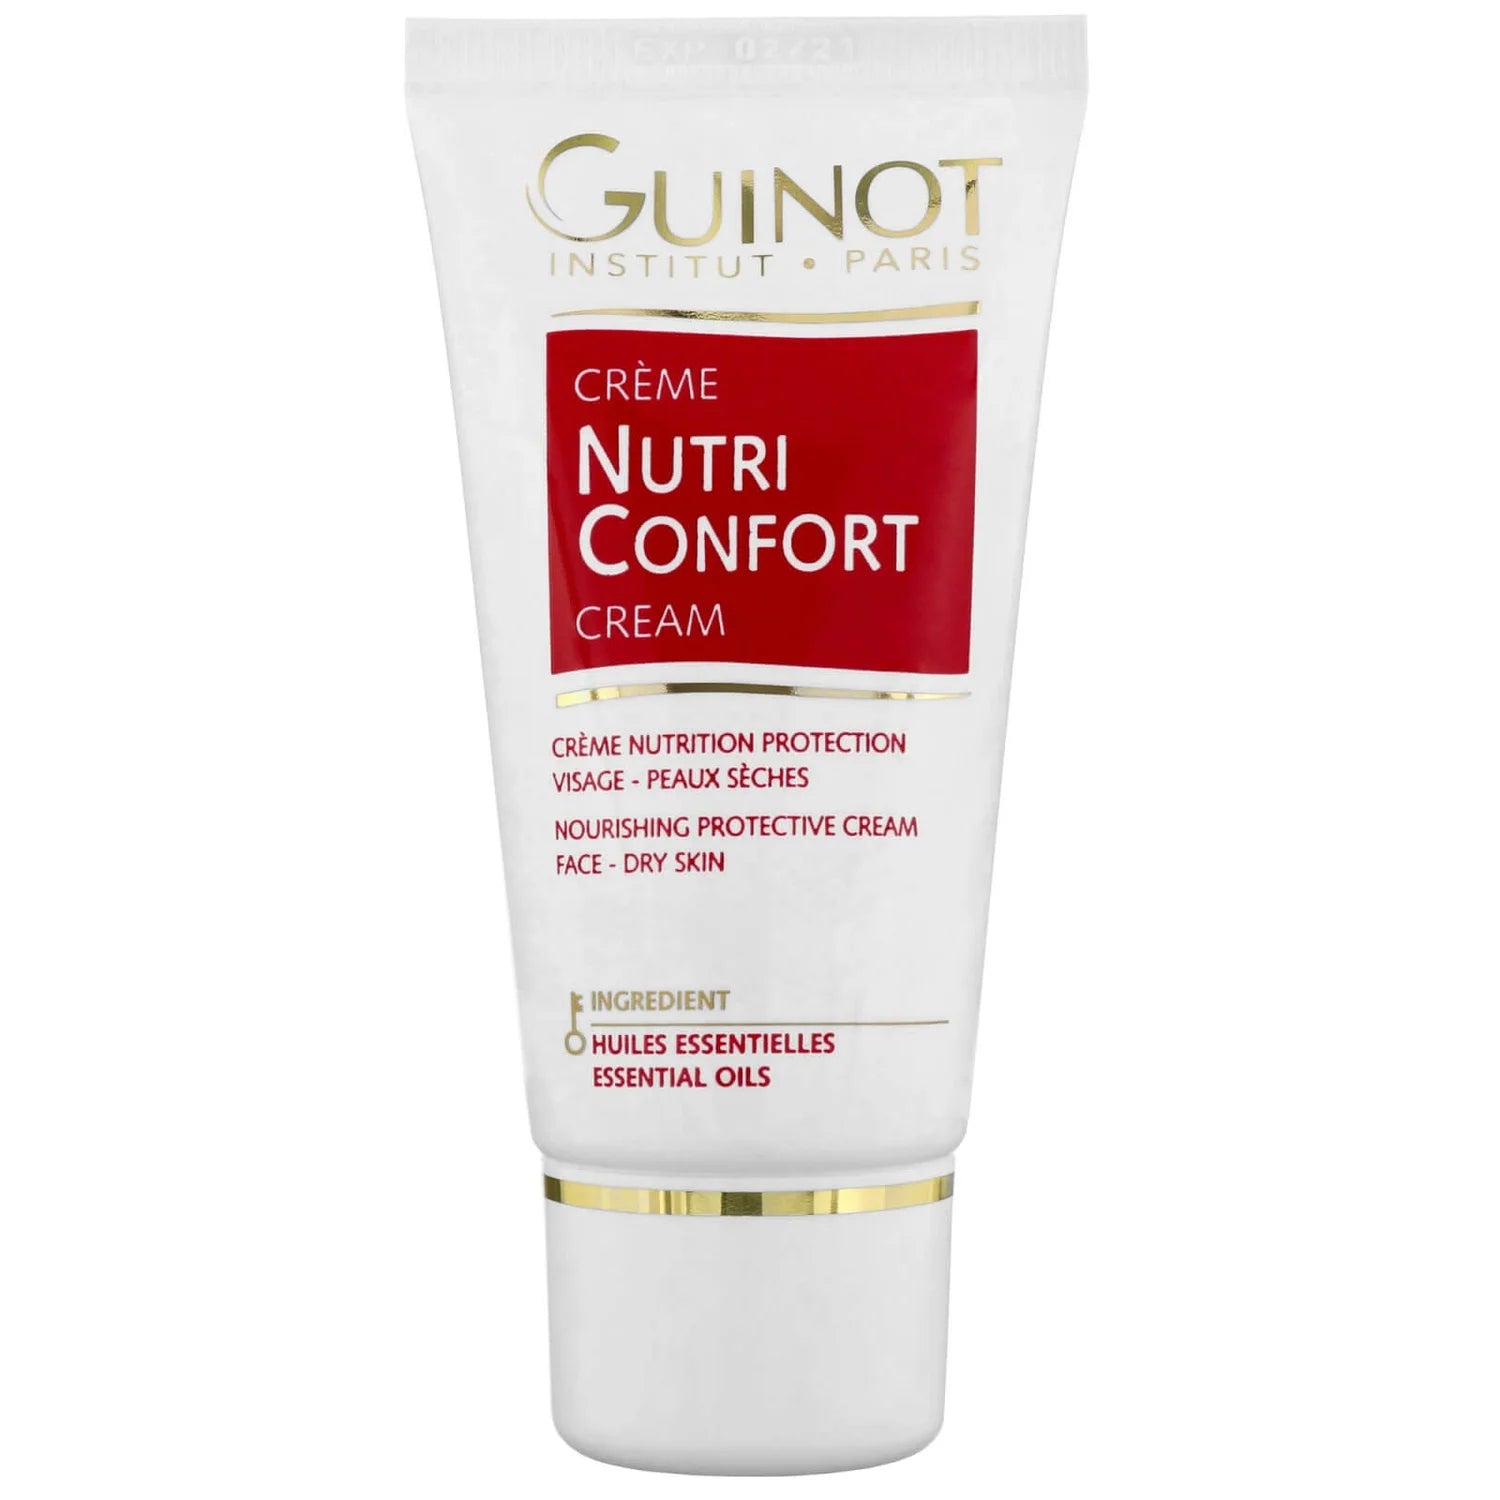 Guinot Creme Nutrition Confort product image.